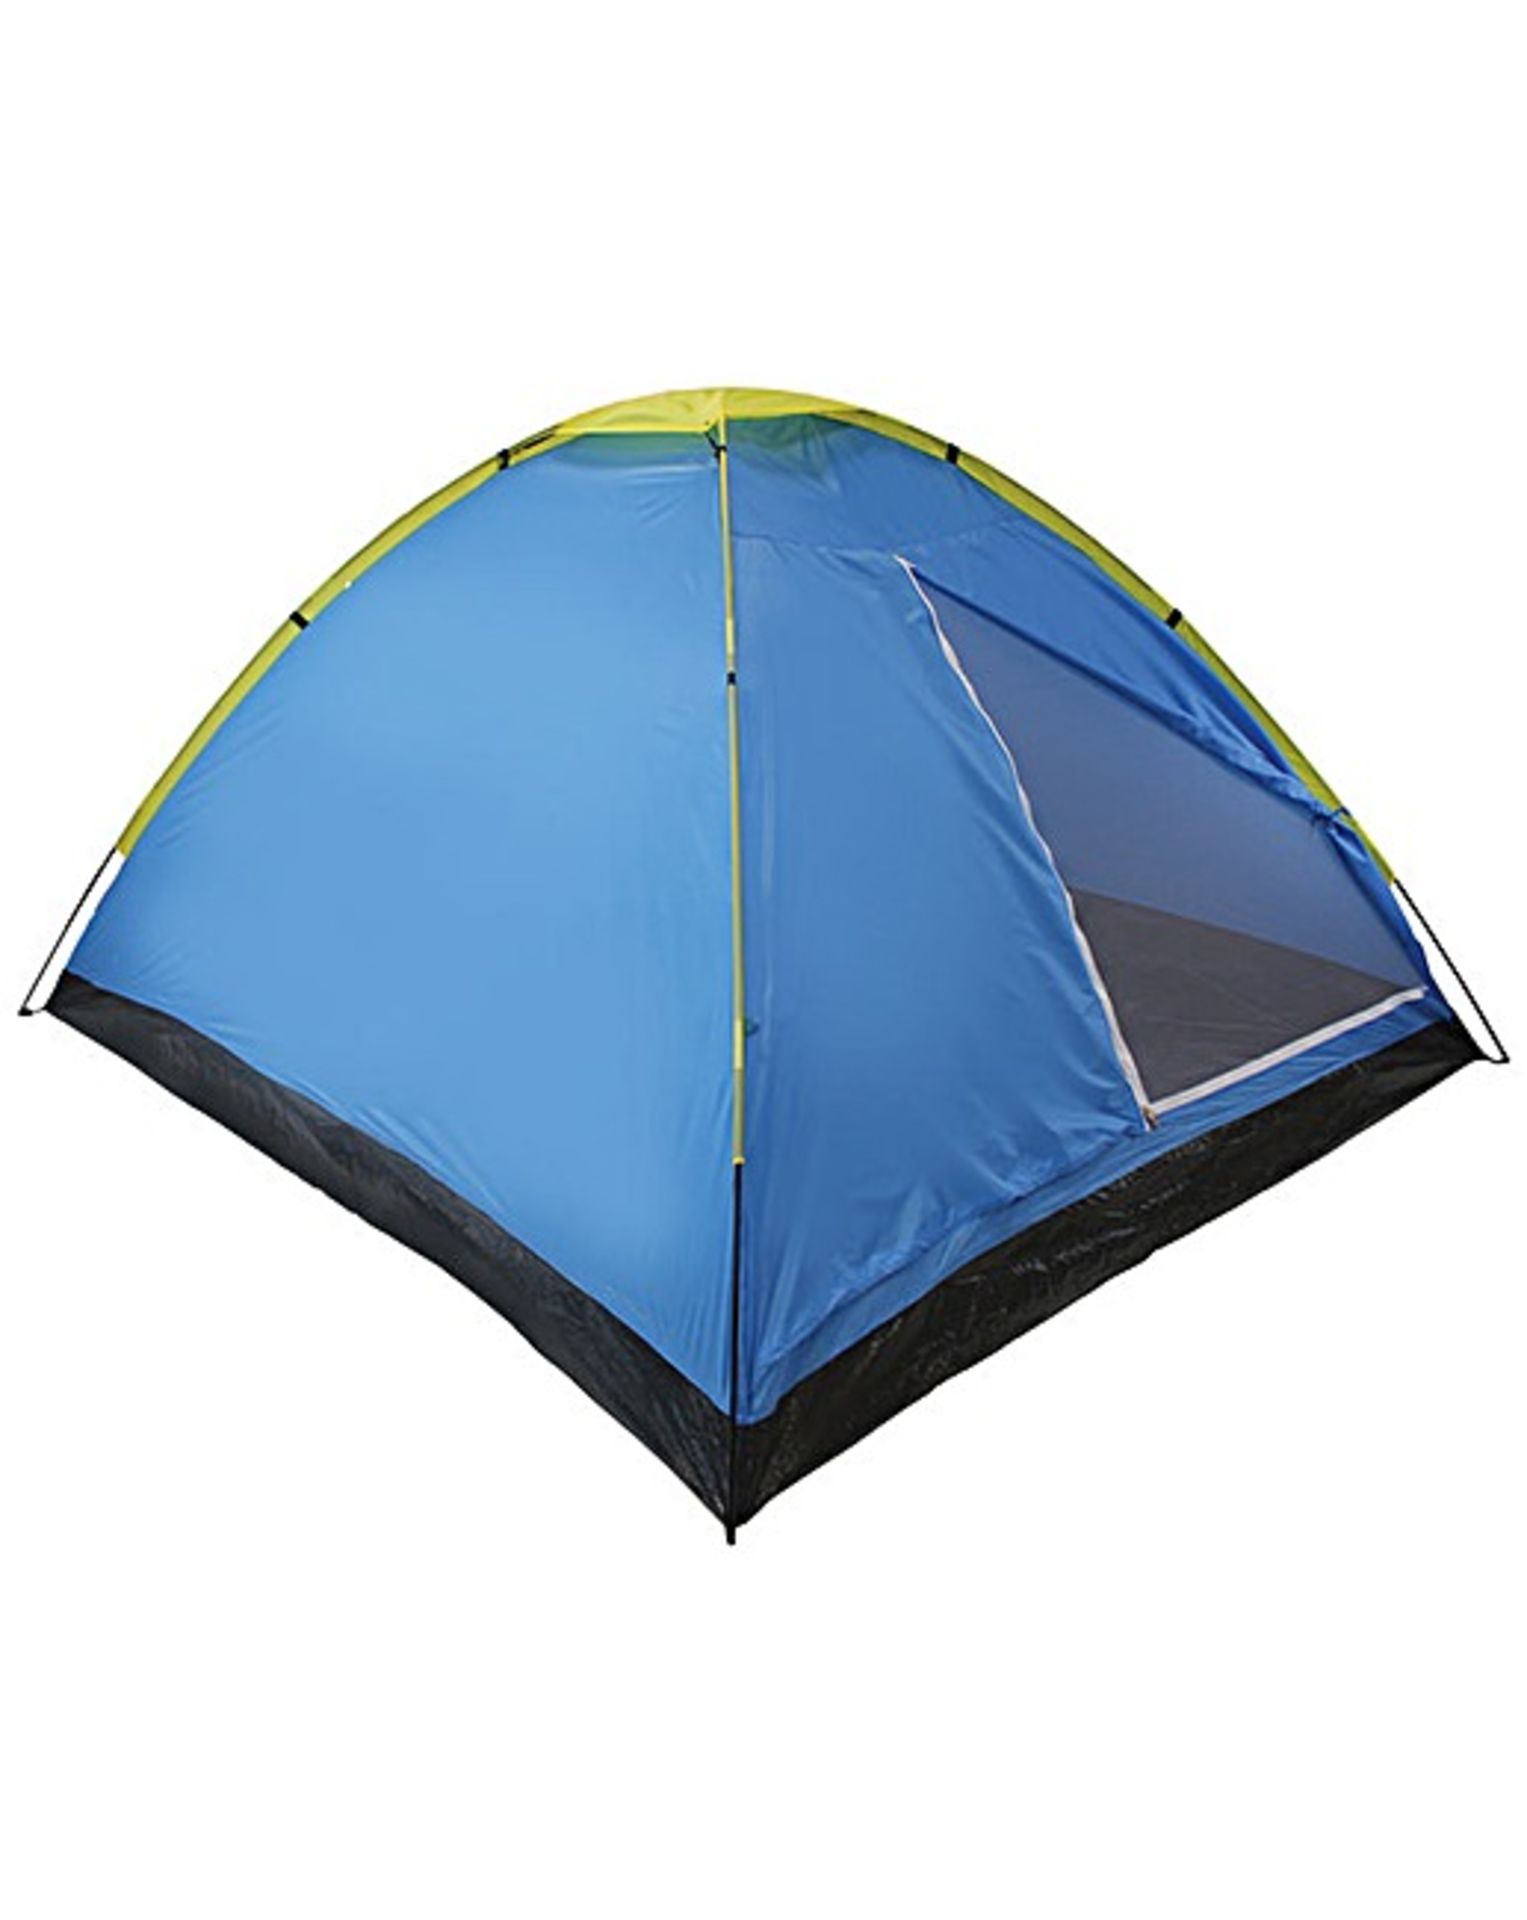 V *TRADE QTY* Brand New Two Person Dome Tent With Fibreglass Poles And Taped Seams RRP21.00 (JD